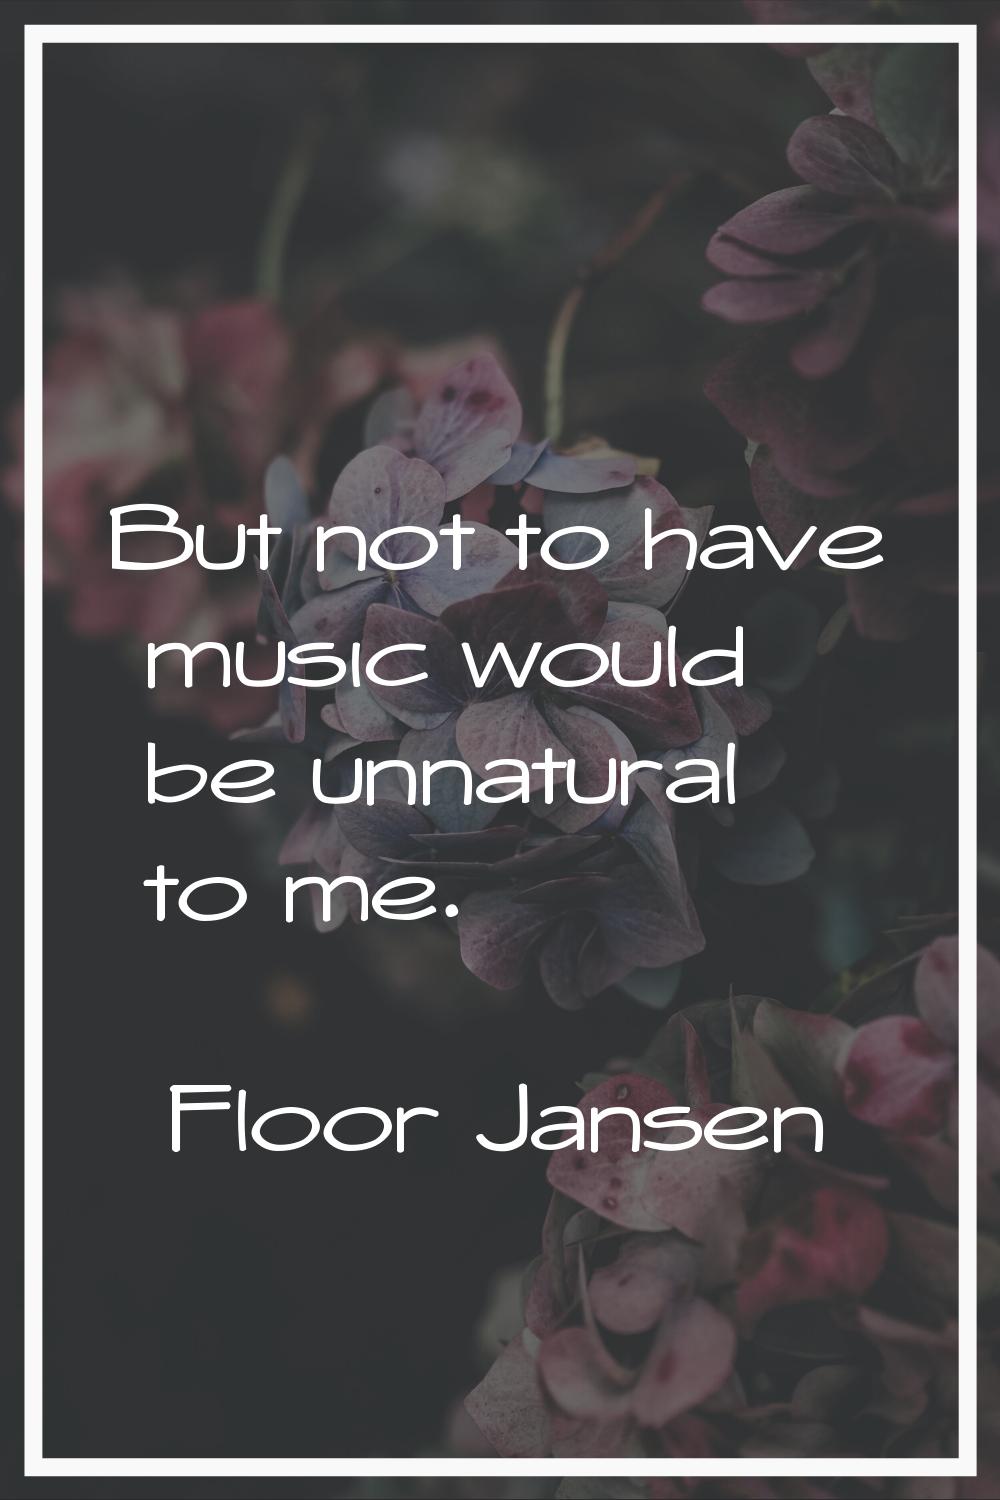 But not to have music would be unnatural to me.